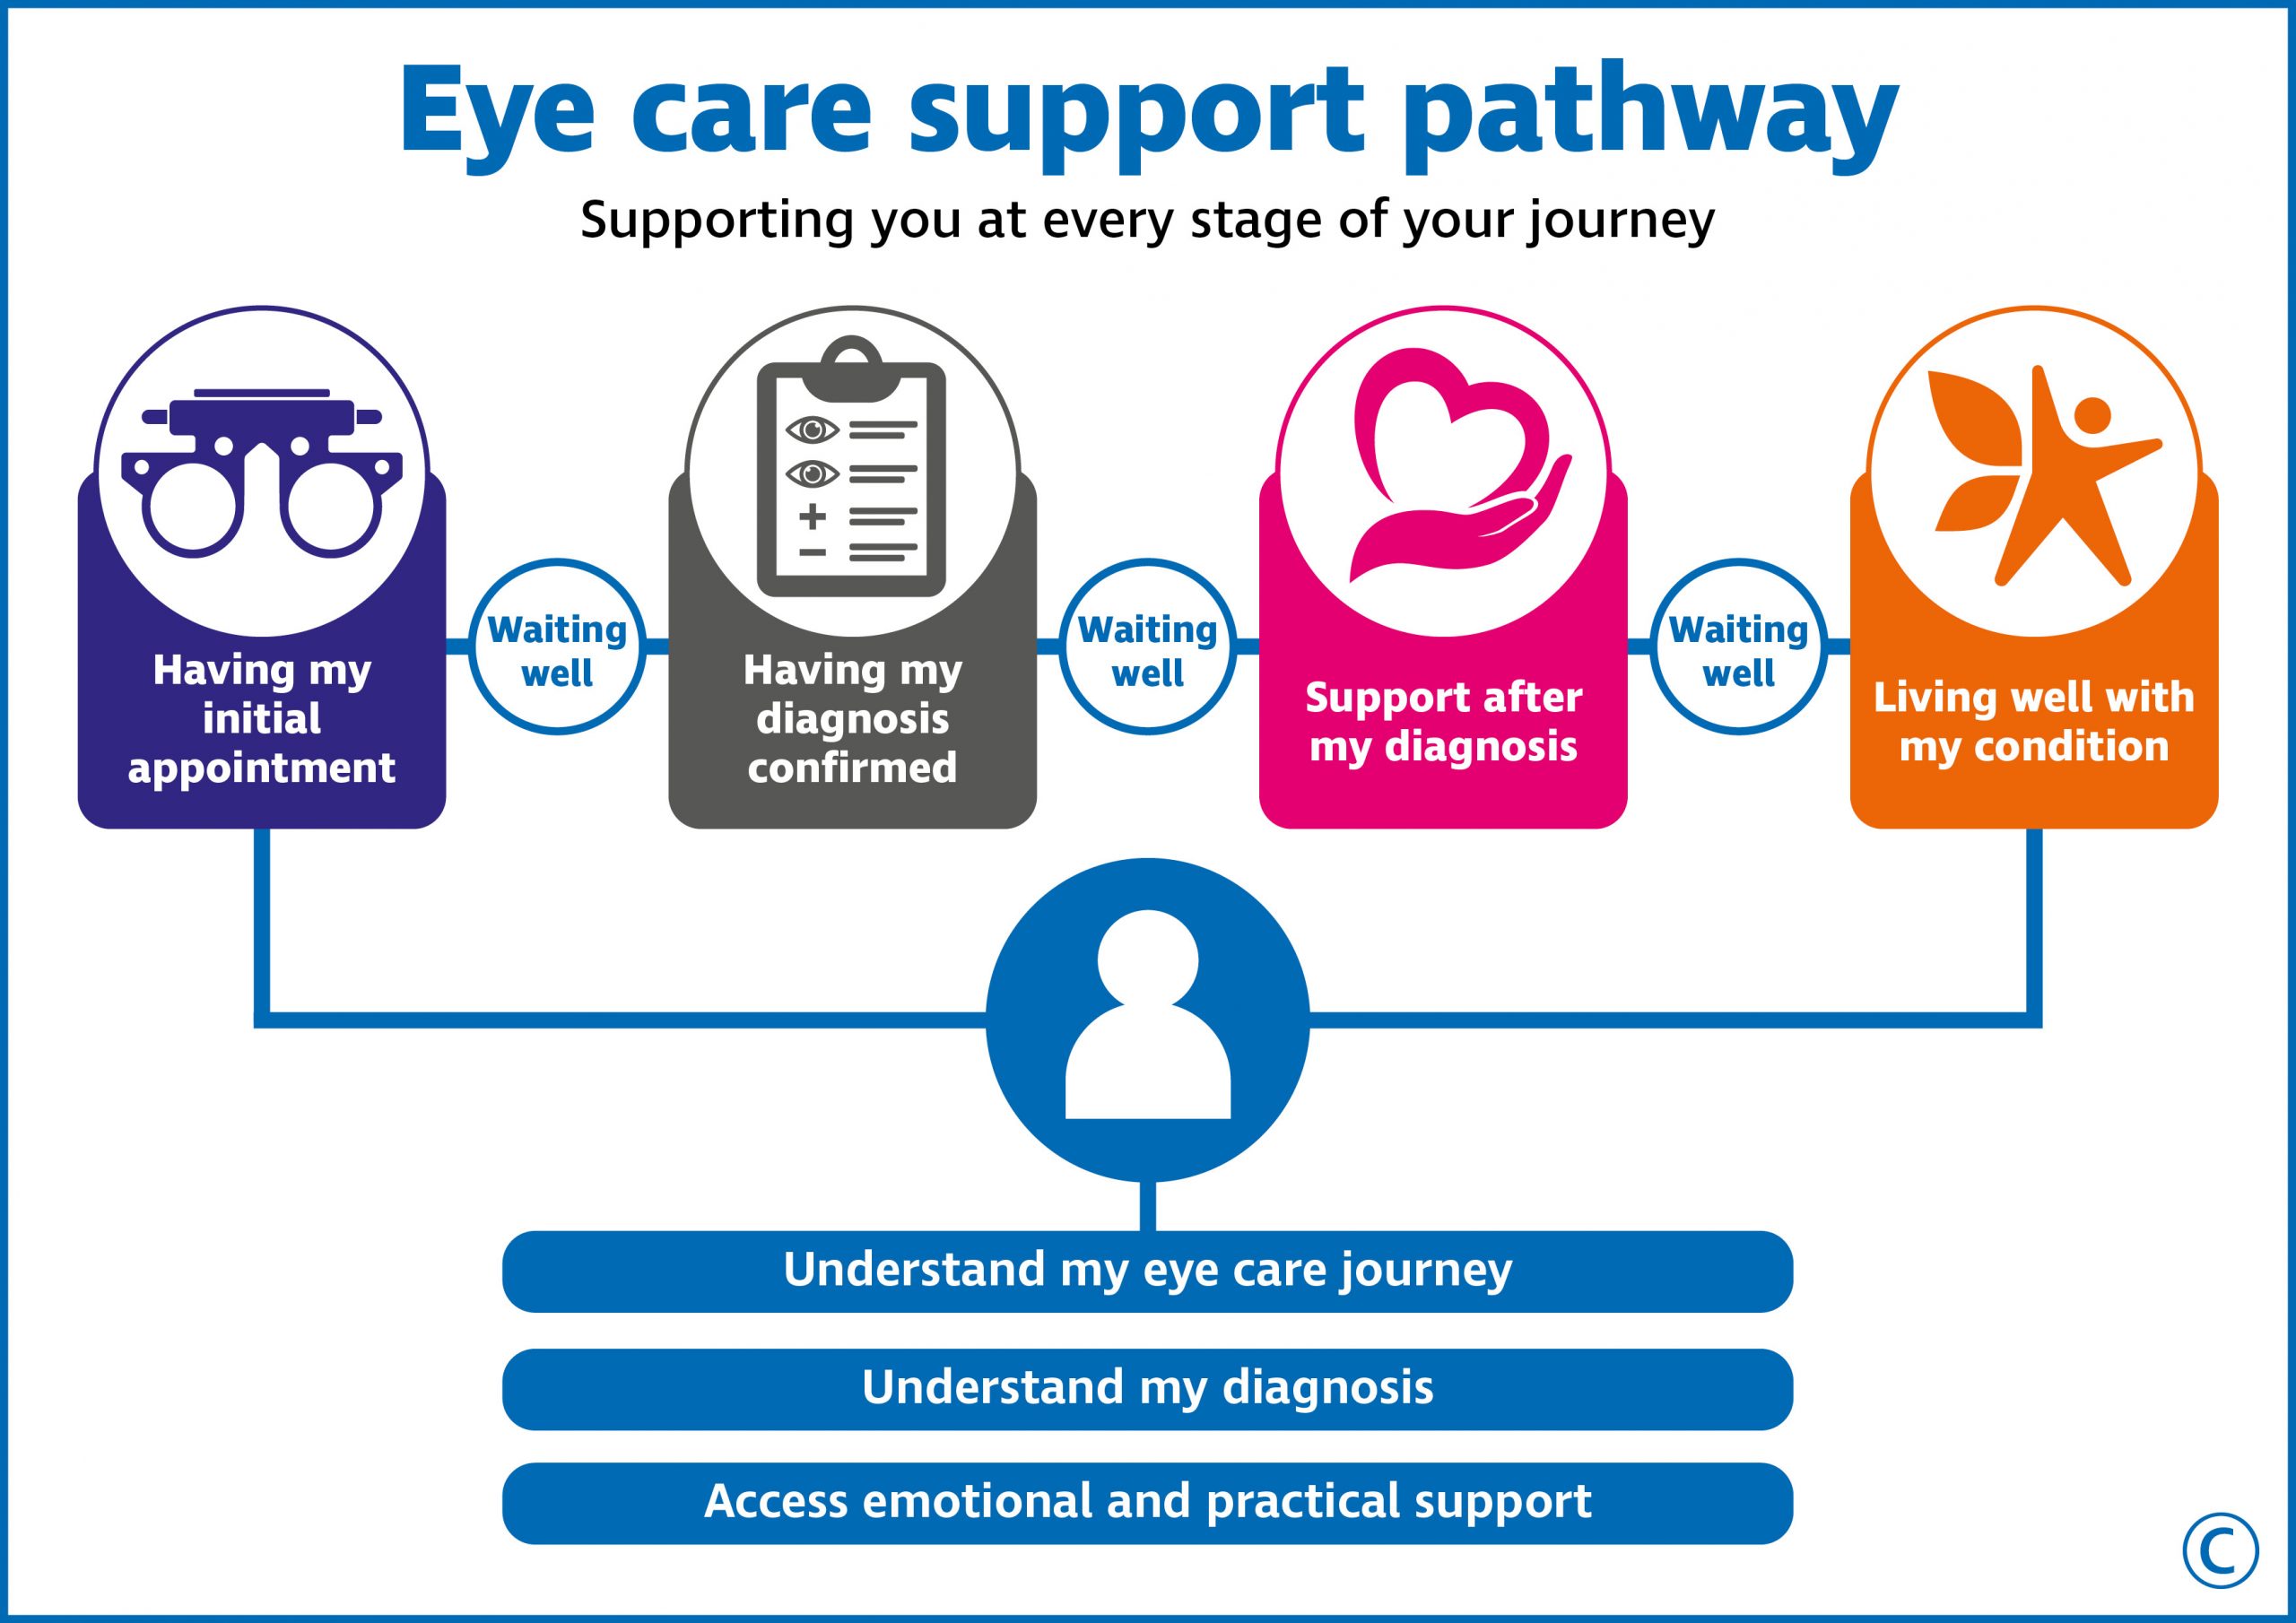 The text in graphic says: Eye care support pathway Supporting you at every stage of your journey Underneath a graphic shows the four stages of an individual’s journey with the following text: 1. Having my initial appointment 2. Waiting well 3. Having my diagnosis confirmed 4. Waiting well 5. Support after my diagnosis 6. Waiting well 7. Living well with my condition Underneath this graphic it outlines what an individual can expect on their journey. Understand my eye care journey Understand my diagnosis 